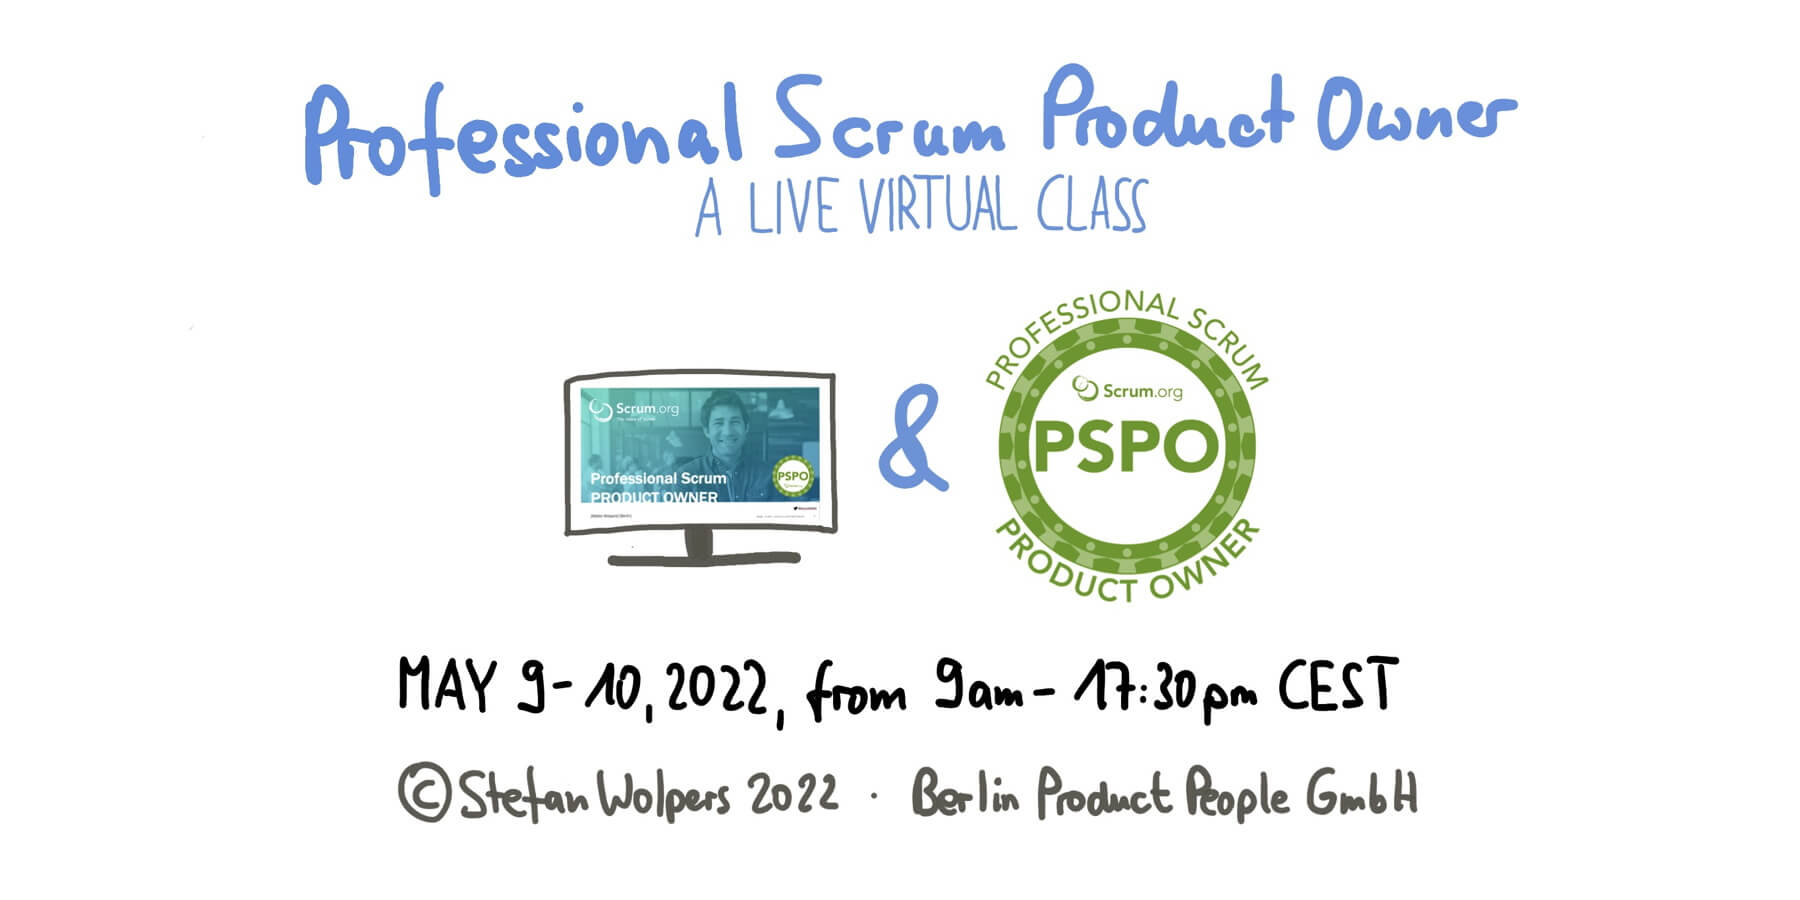 Professional Scrum Product Owner Training with PSPO I Certificate May 9-10, 2022 — Berlin Product People GmbH — BER-73